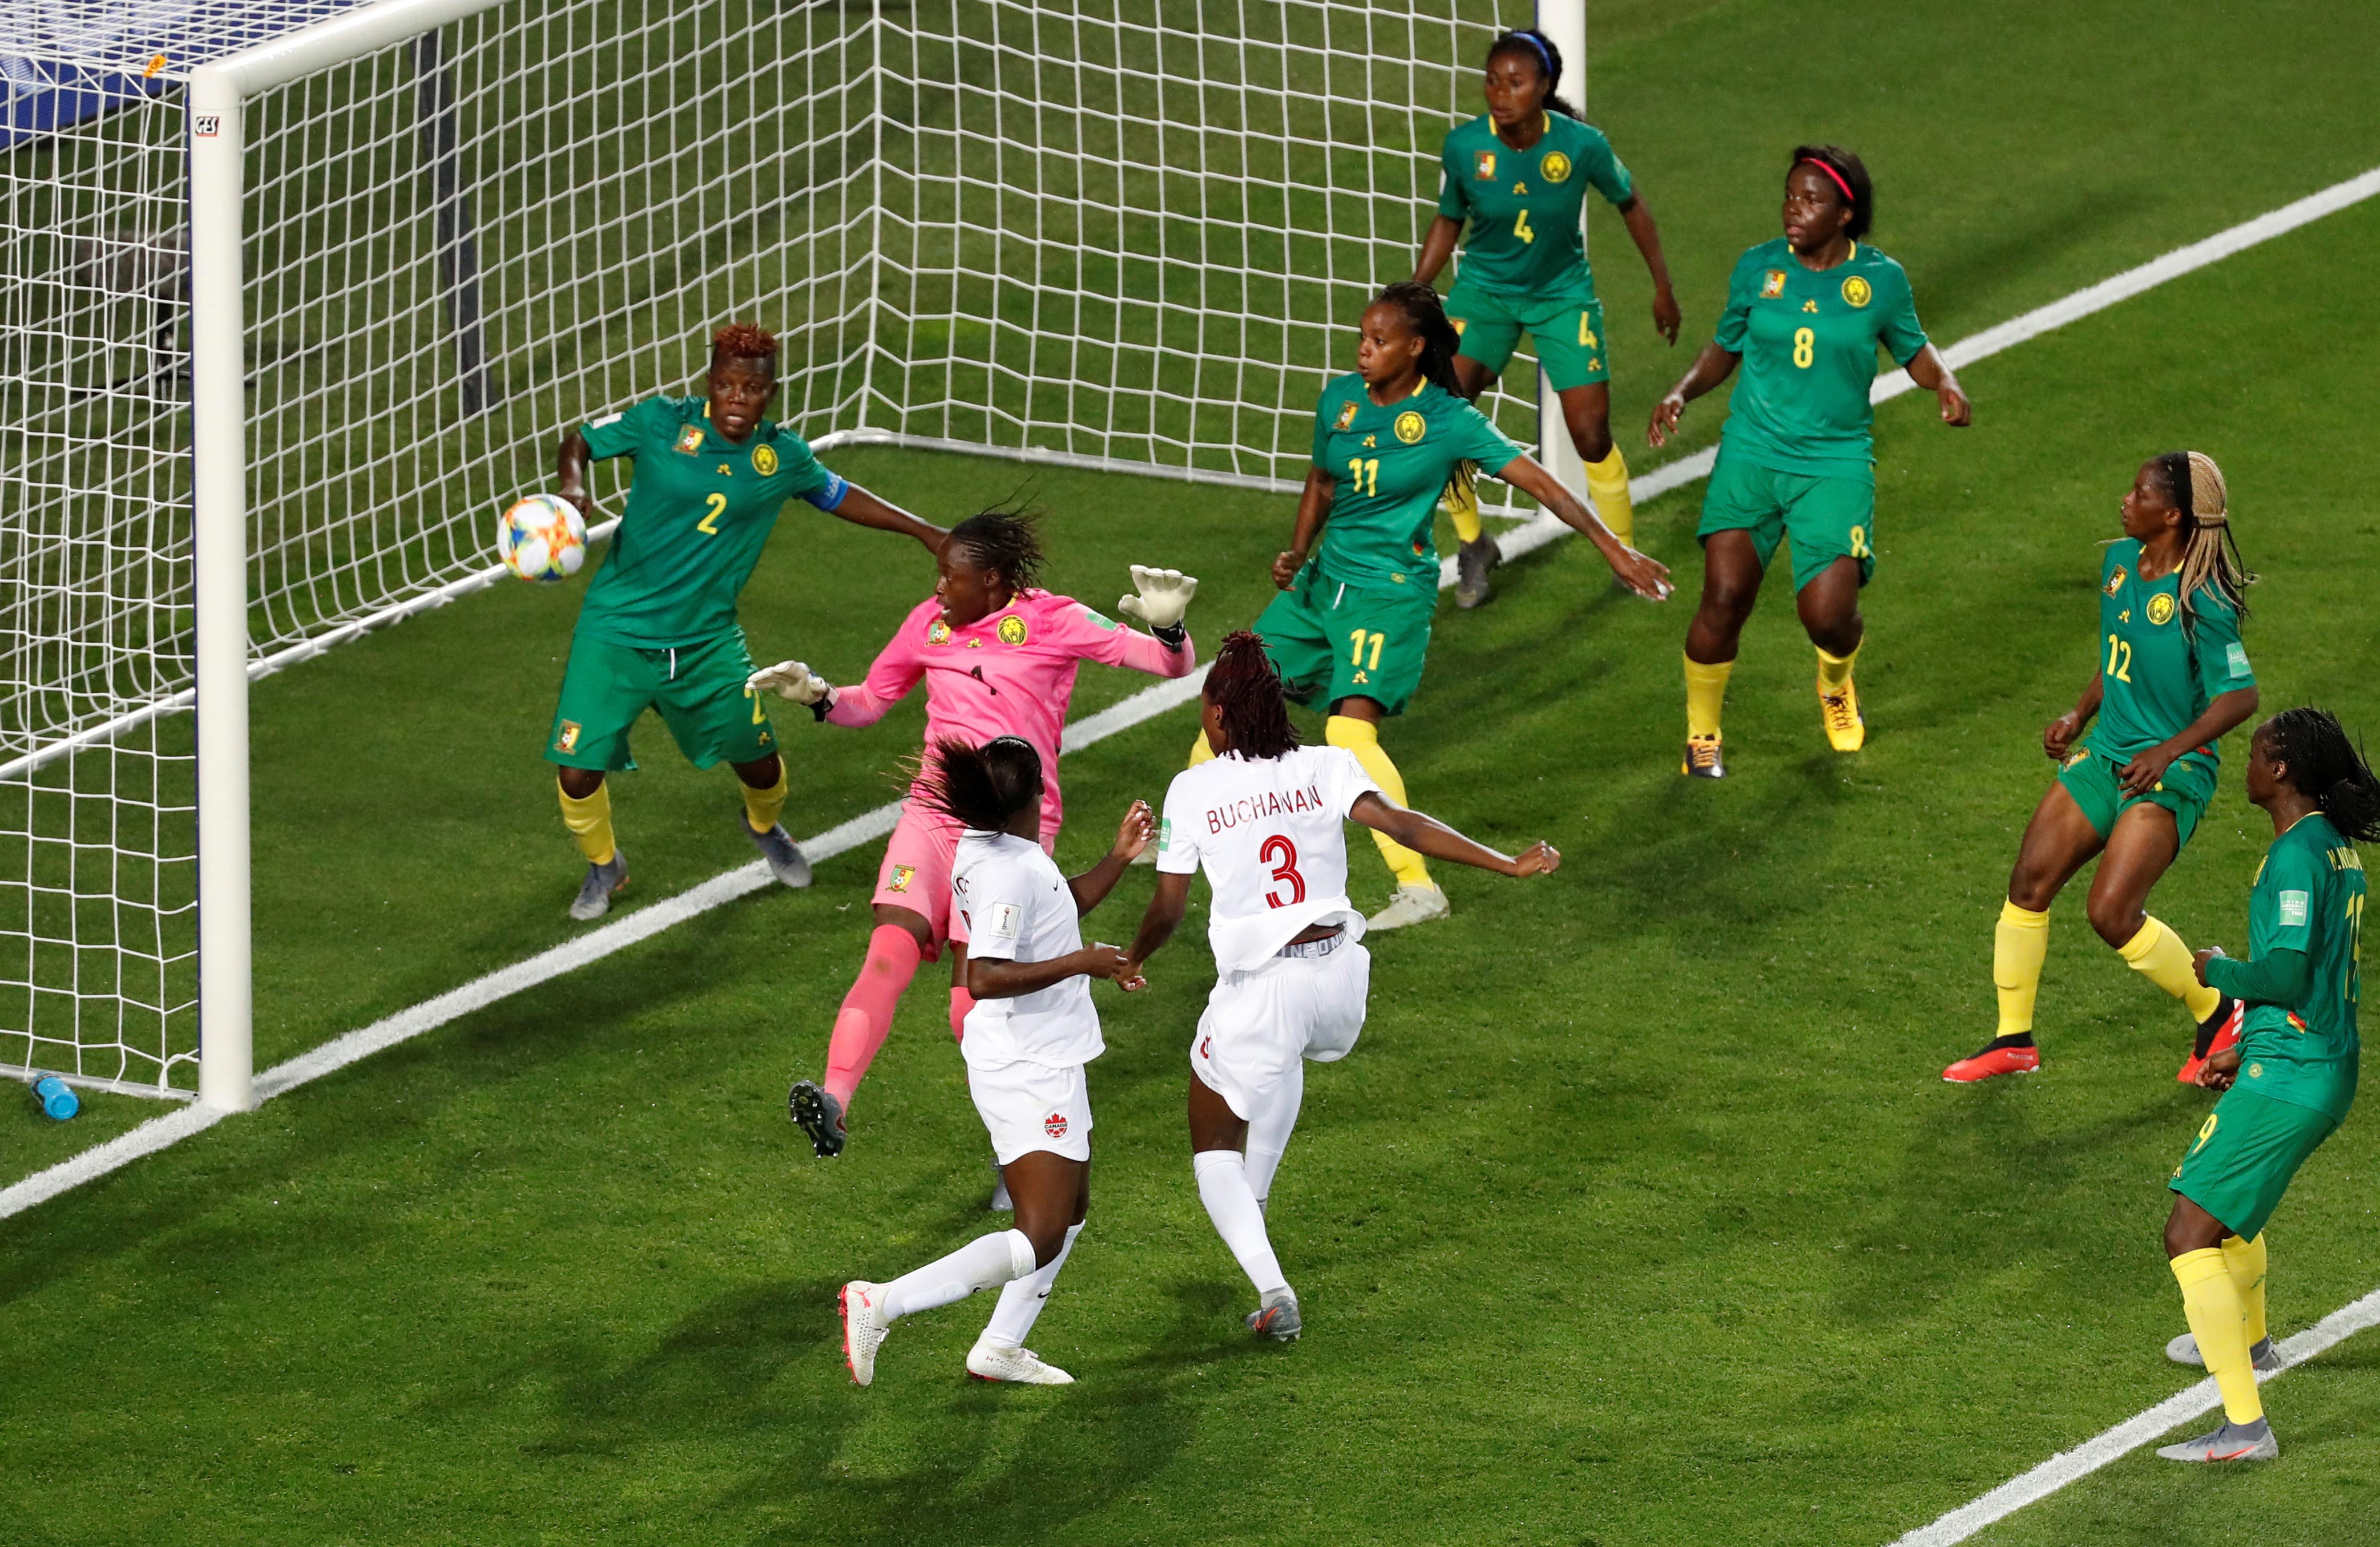 Canada's Kadeisha Buchanan scores their first goal during the Women's World Cup Group E match between Canada and Cameroon, at Stade de La Mosson, in Montpellier, France, on June 10, 2019. Photo: Reuters